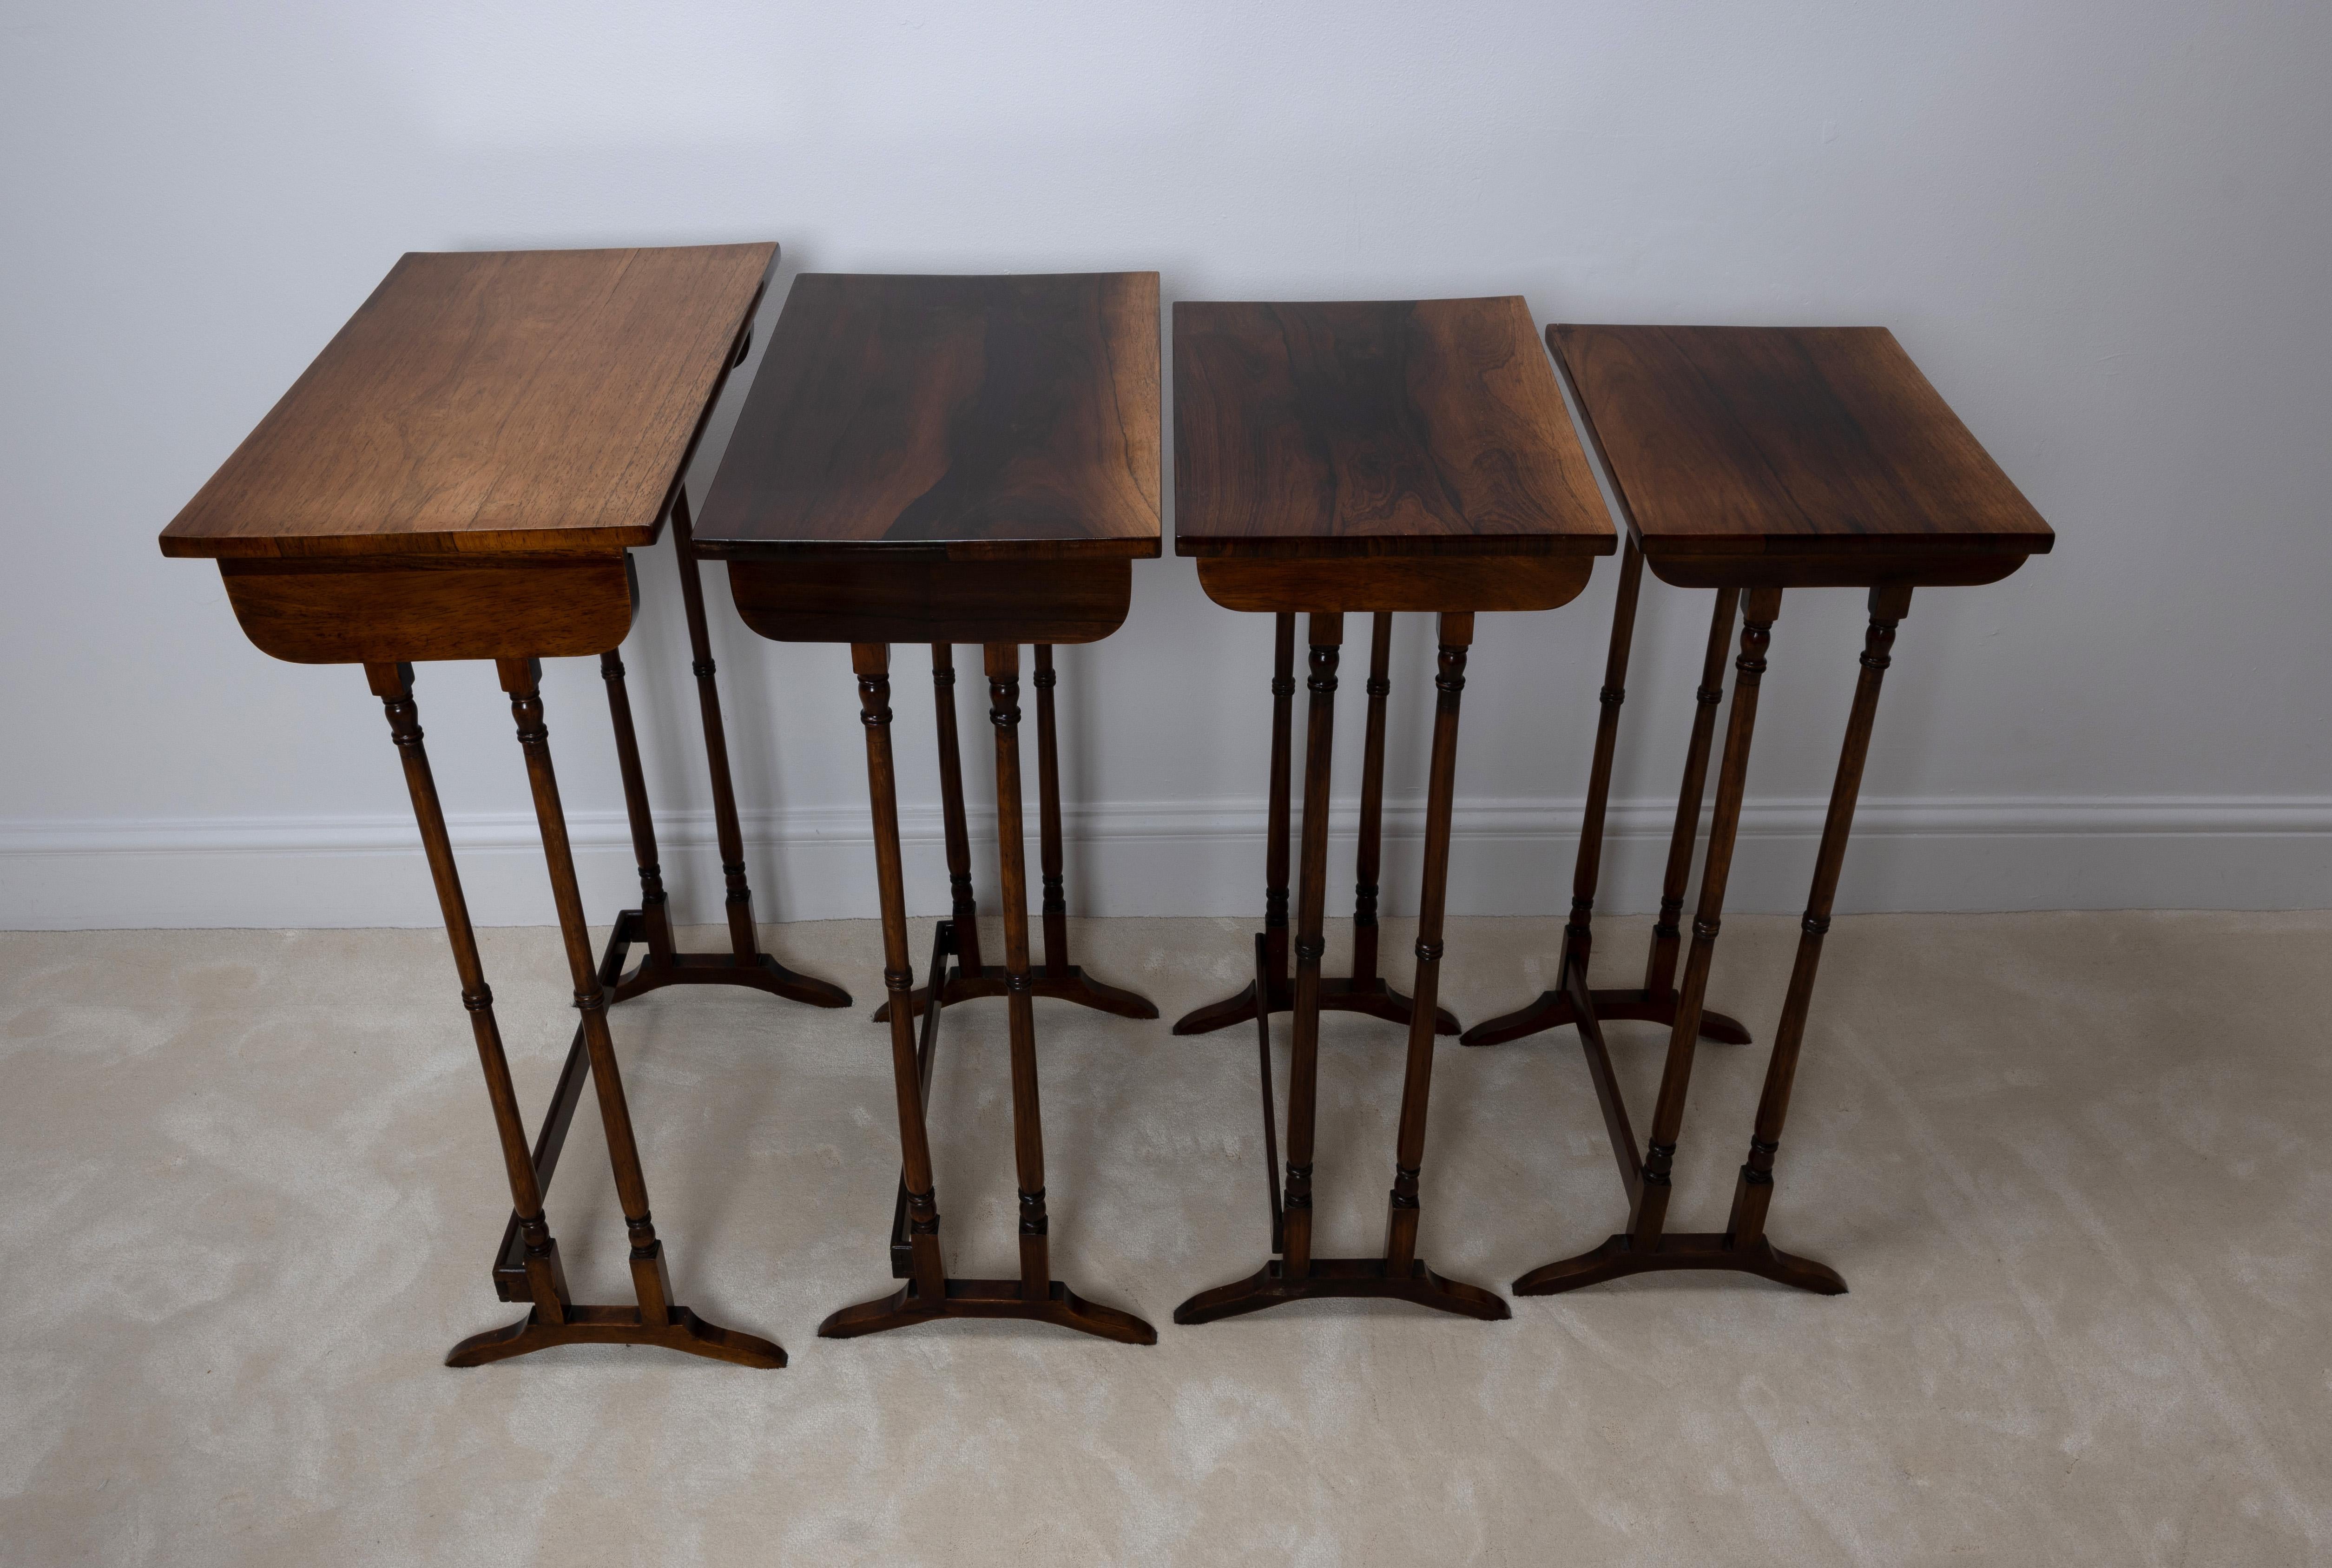 Antique English Regency Revival Rosewood Quartetto Of Nesting Table C.1820 For Sale 8